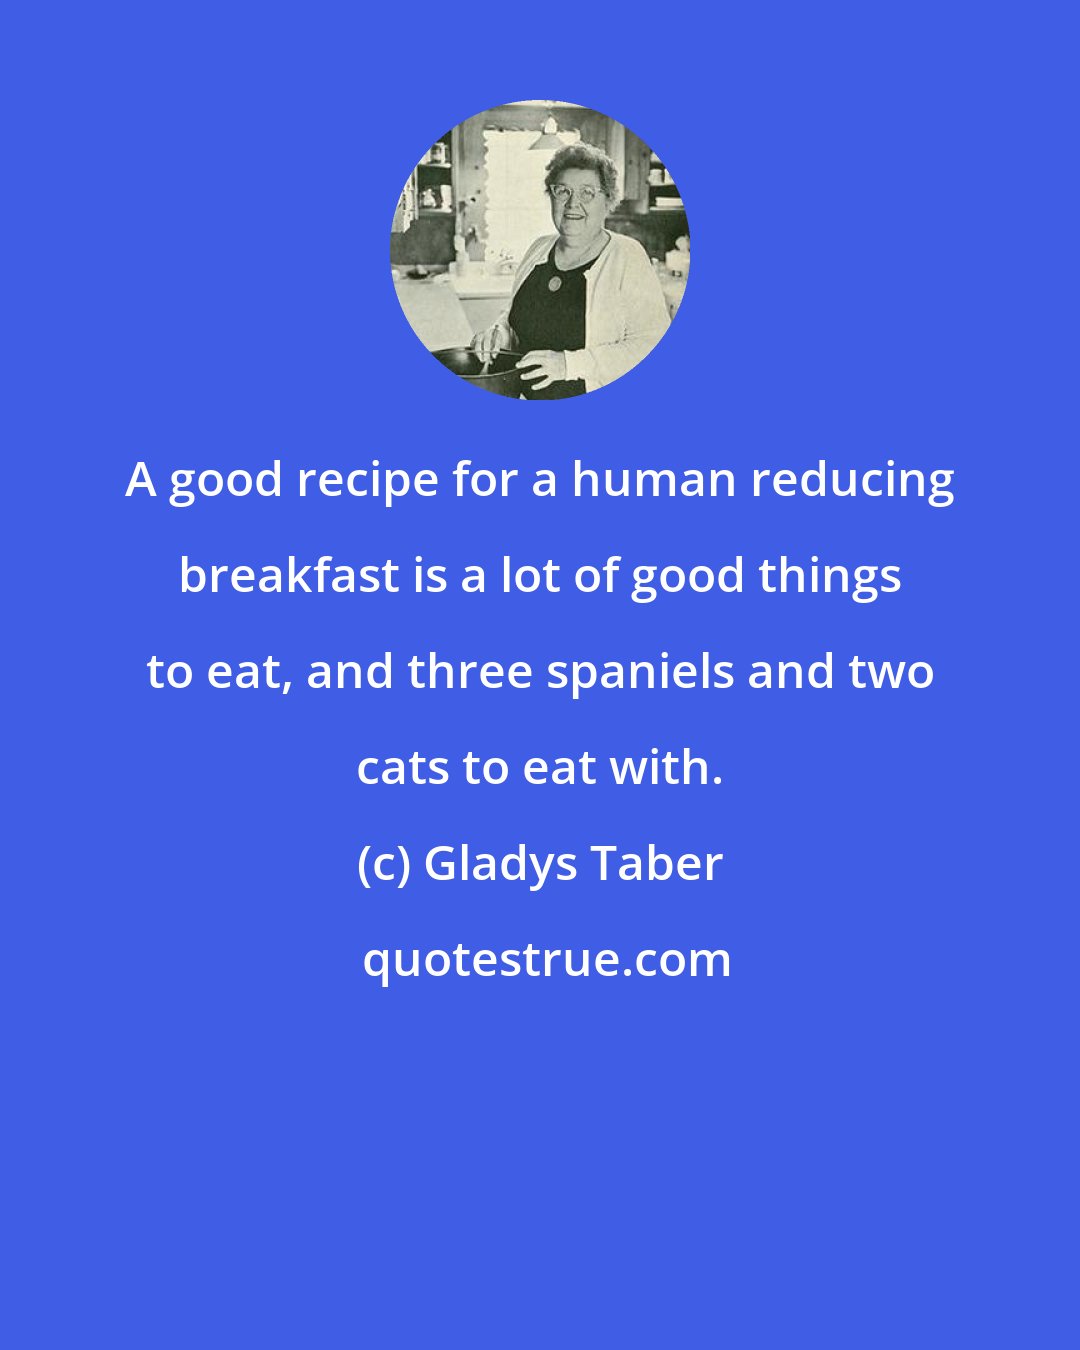 Gladys Taber: A good recipe for a human reducing breakfast is a lot of good things to eat, and three spaniels and two cats to eat with.